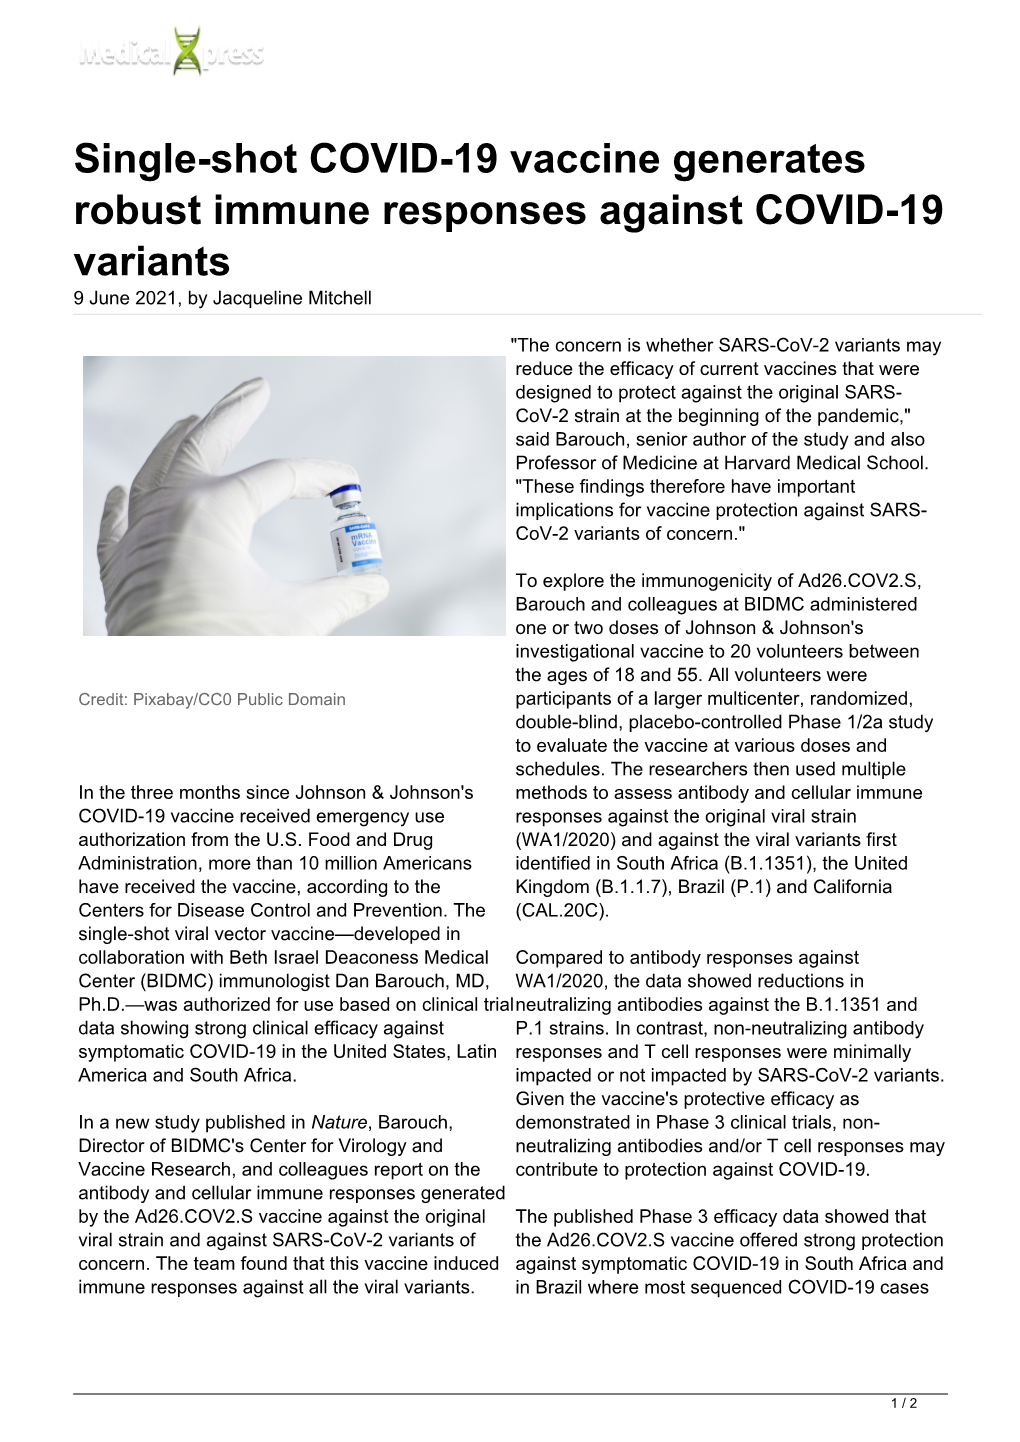 Single-Shot COVID-19 Vaccine Generates Robust Immune Responses Against COVID-19 Variants 9 June 2021, by Jacqueline Mitchell